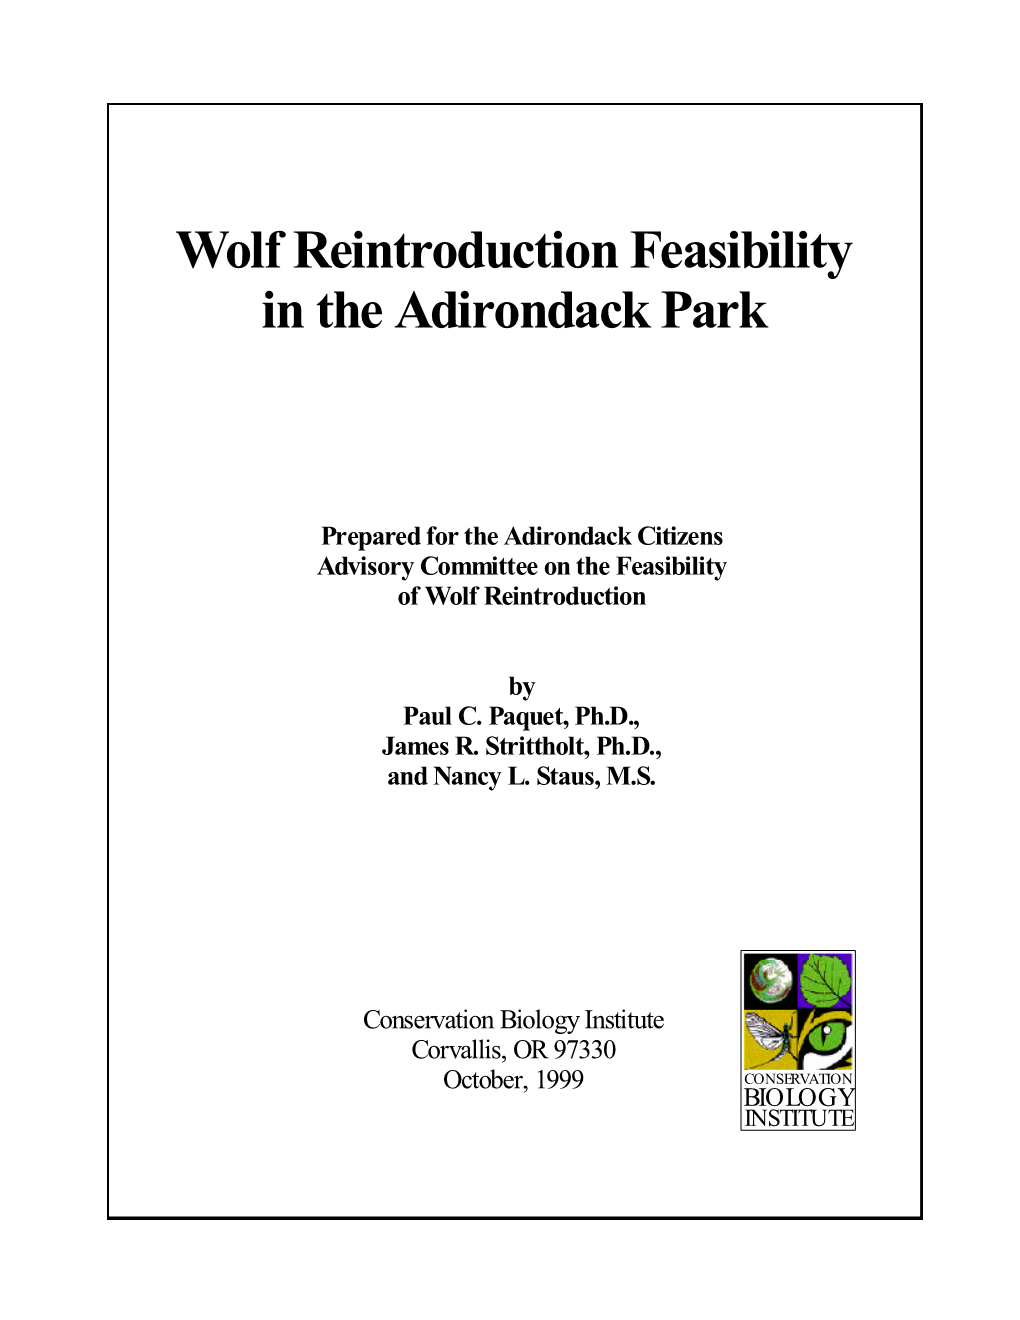 Wolf Reintroduction Feasibility in the Adirondack Park